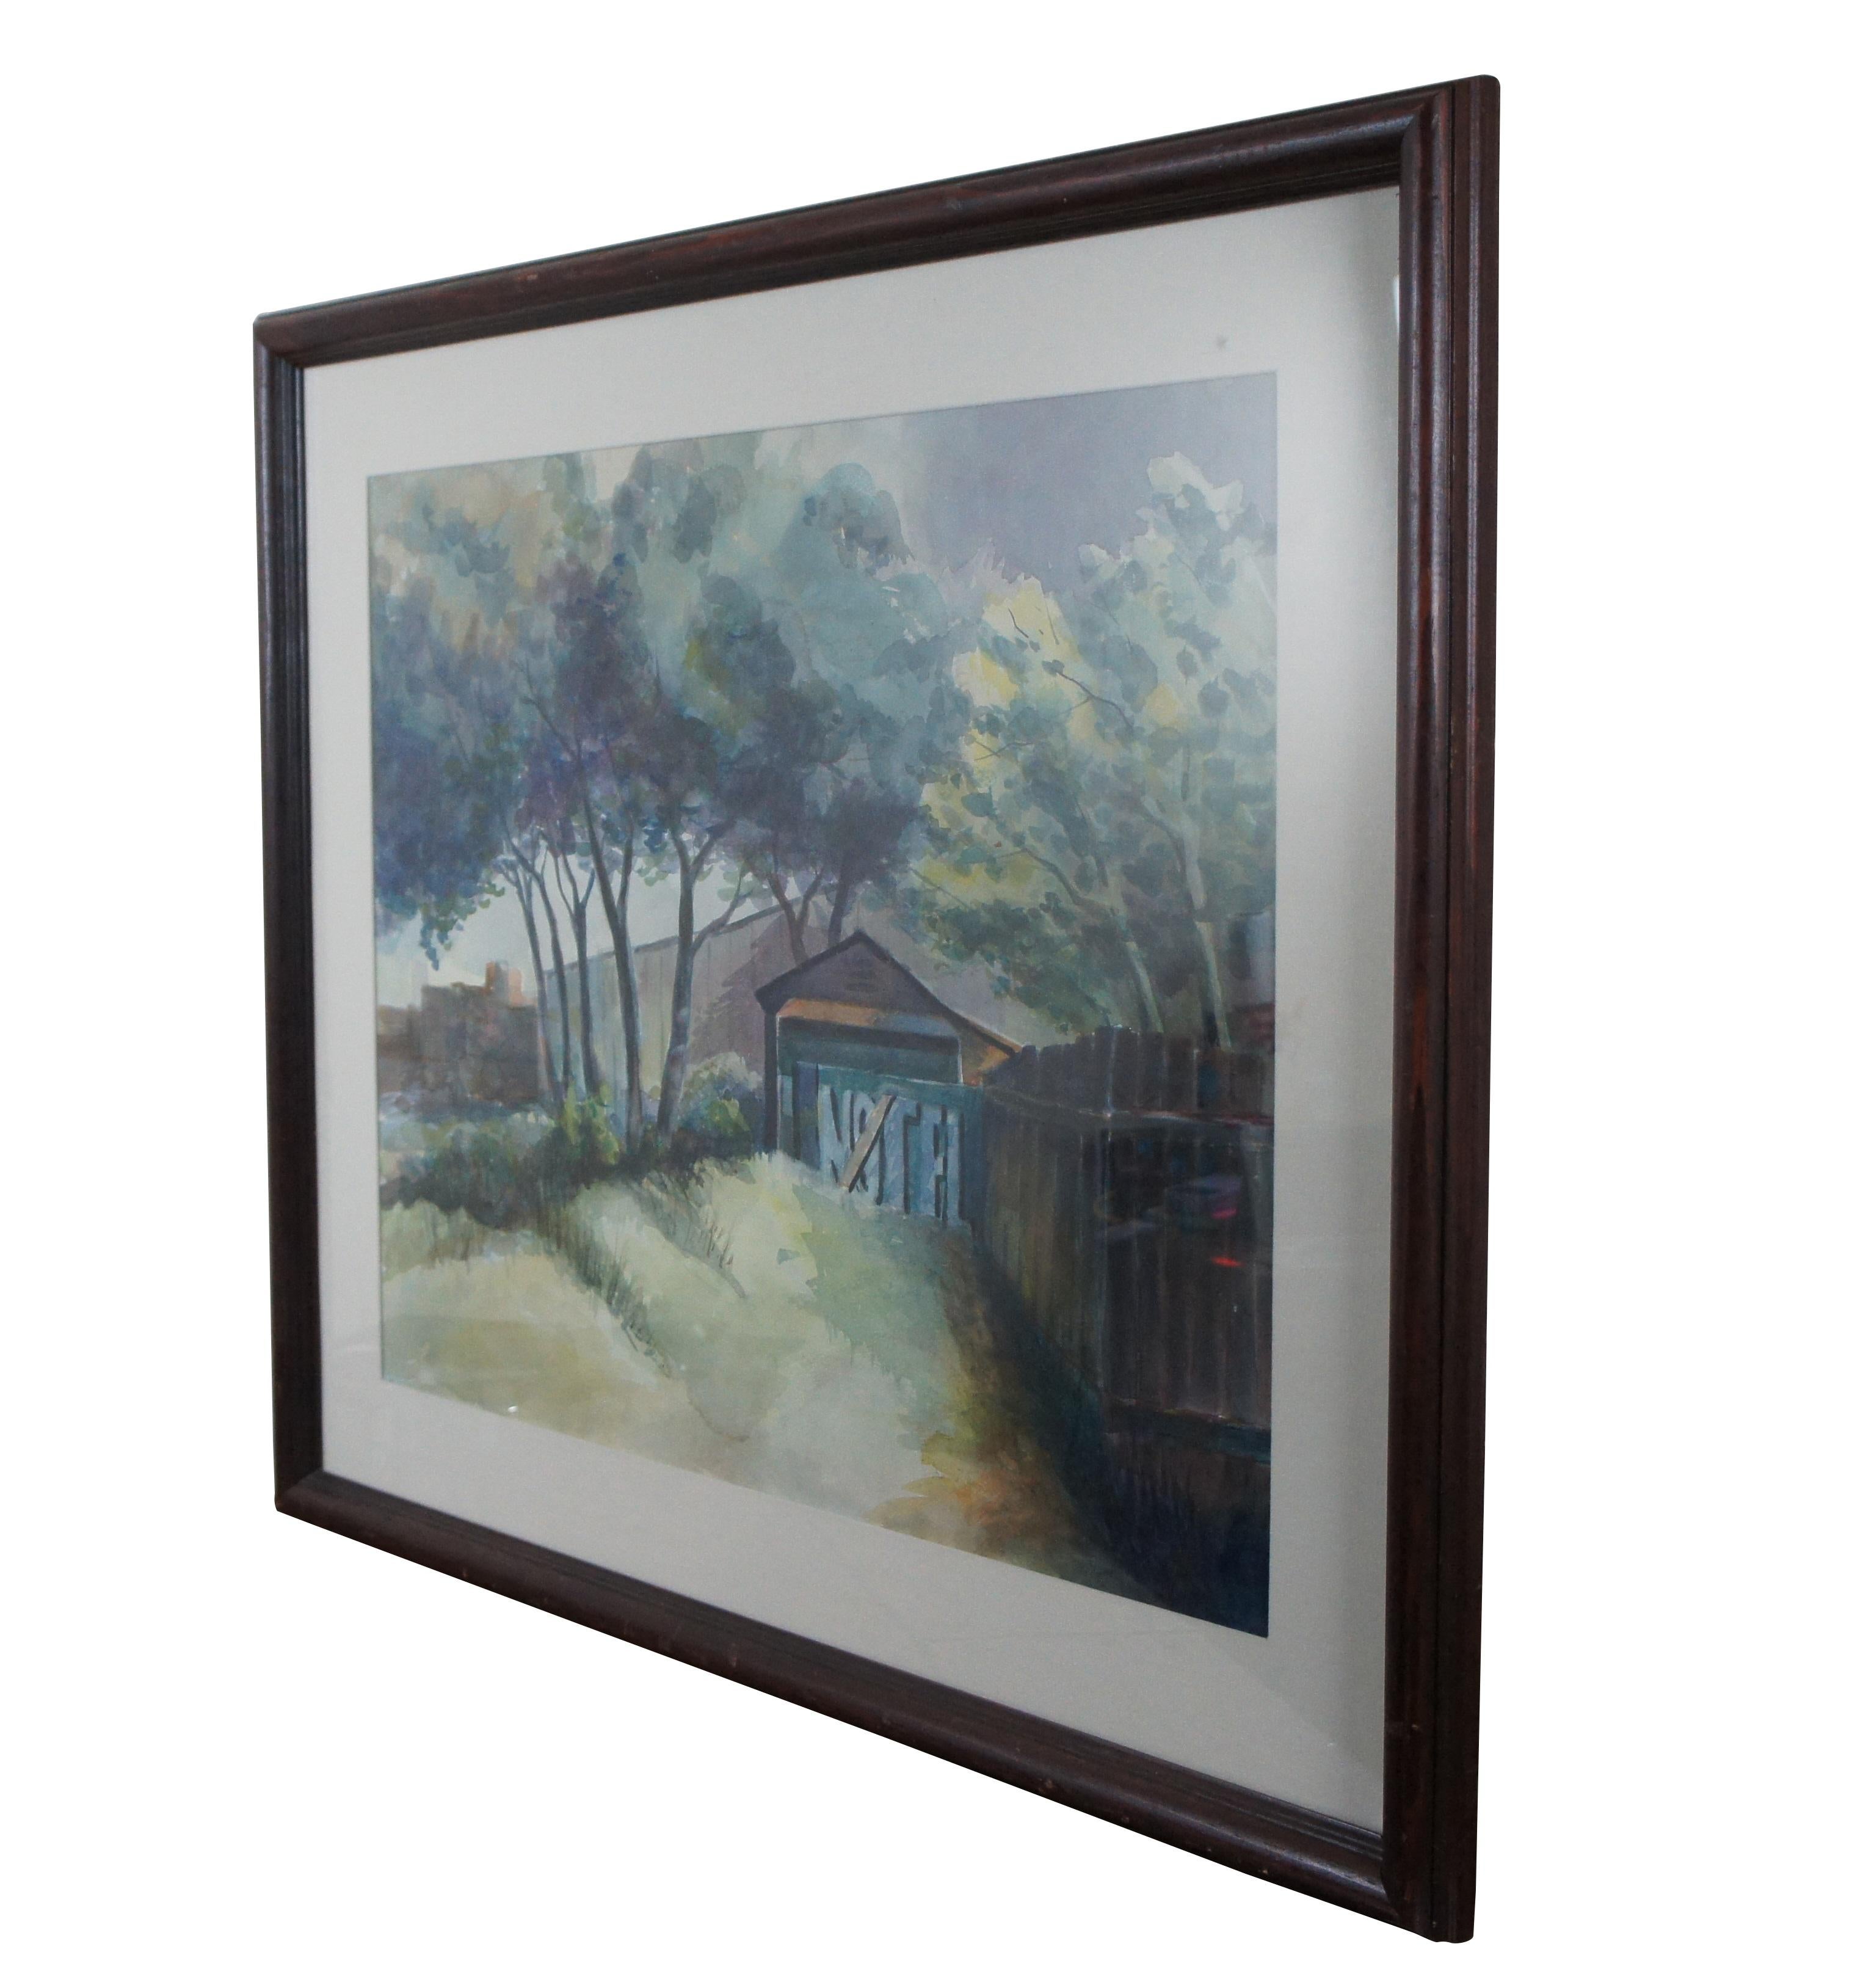 Vintage framed watercolor painting featuring a backyard landscape / cityscape with barn / trees / fence and 